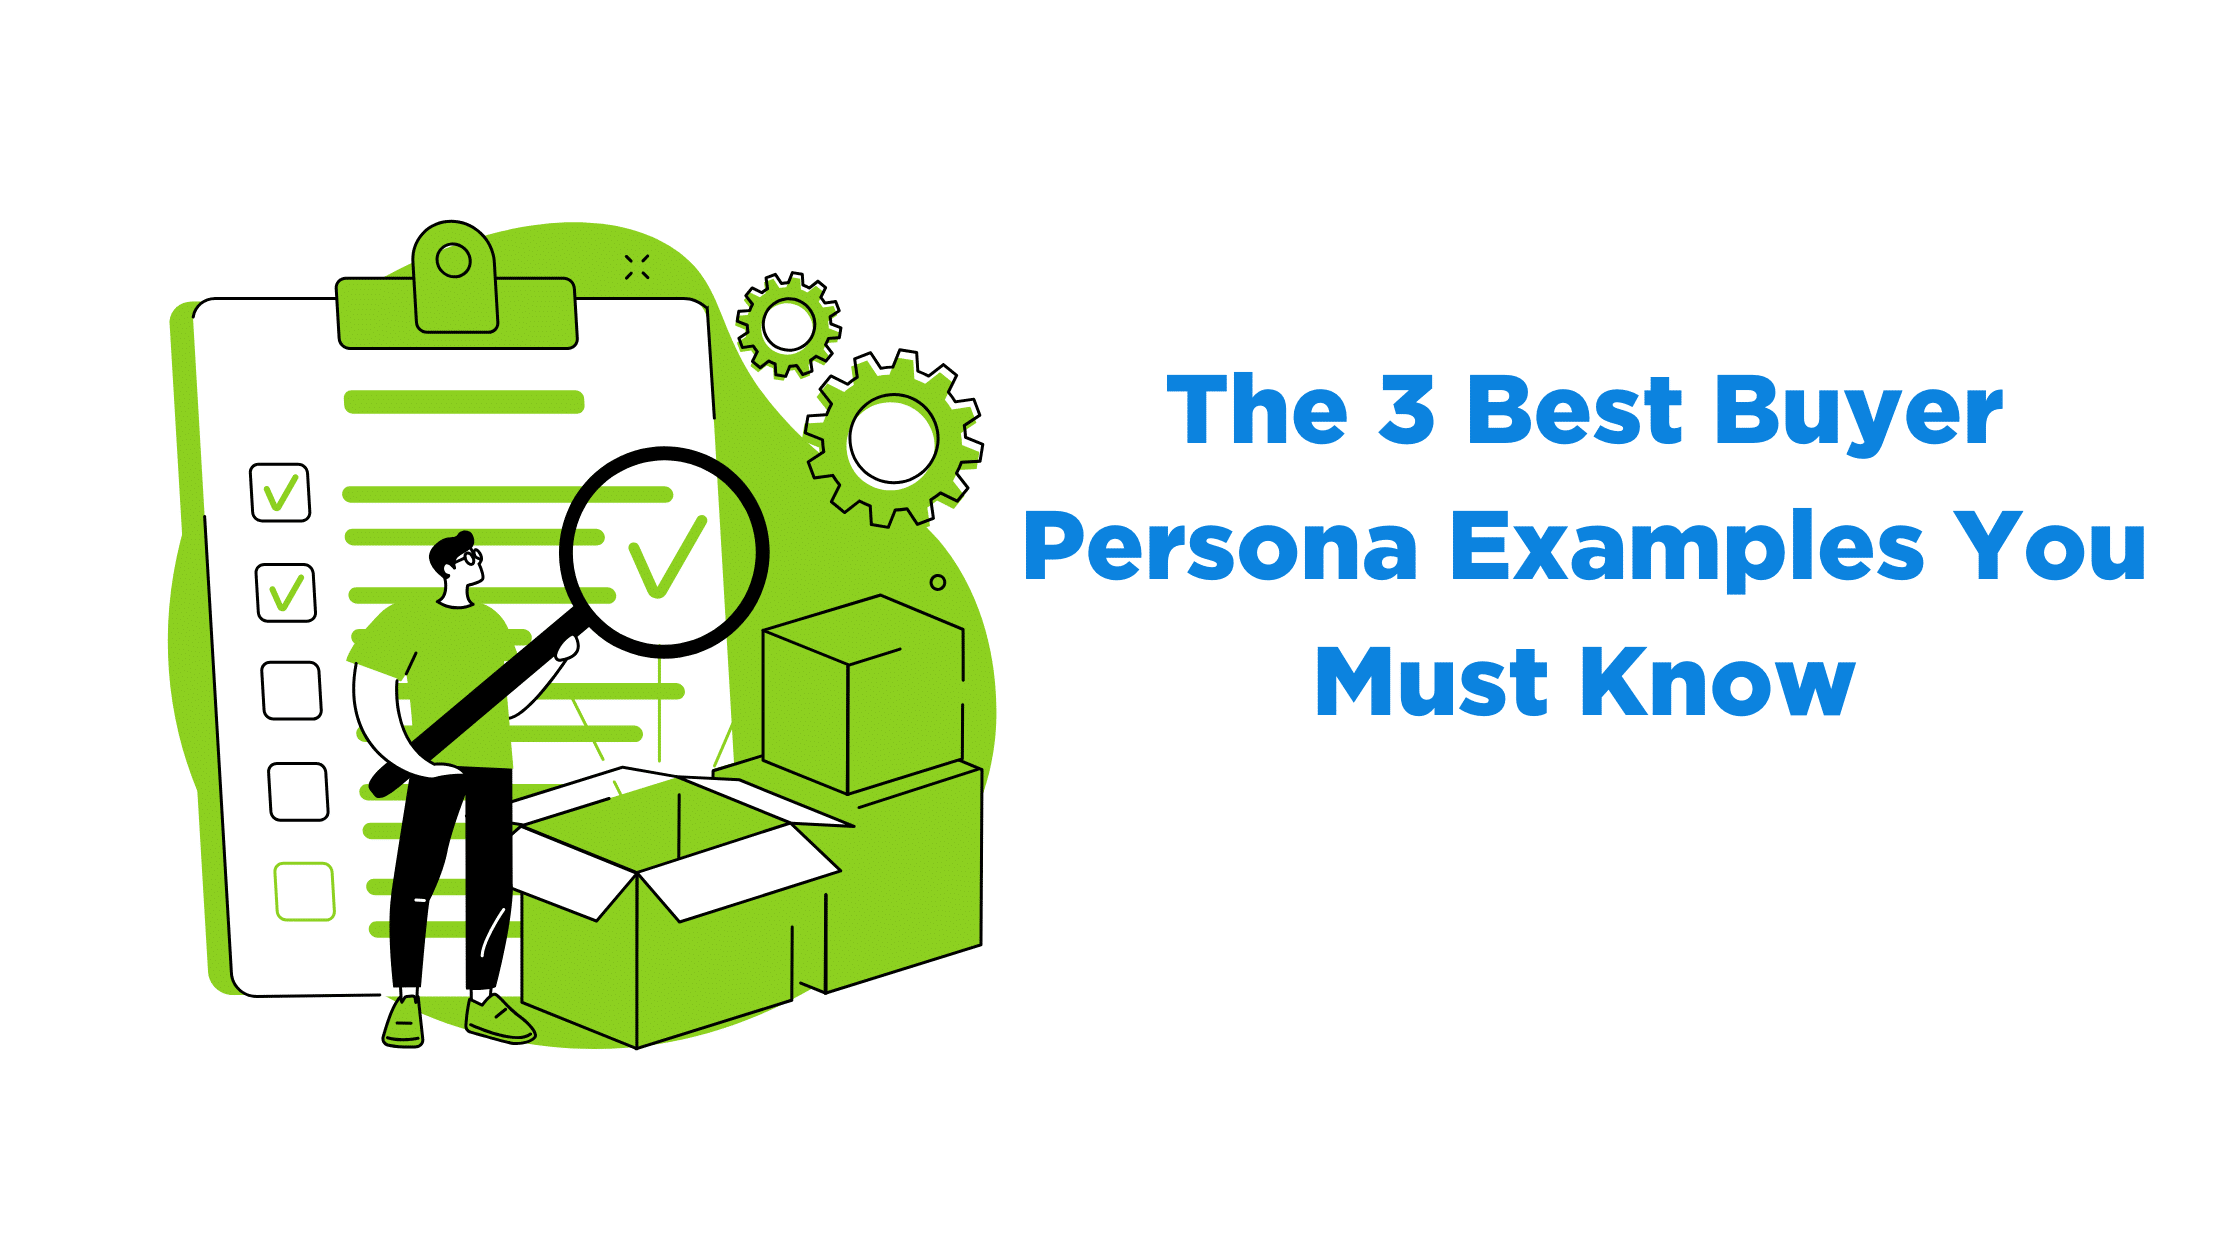 The 3 Best Buyer Persona Examples You Must Know